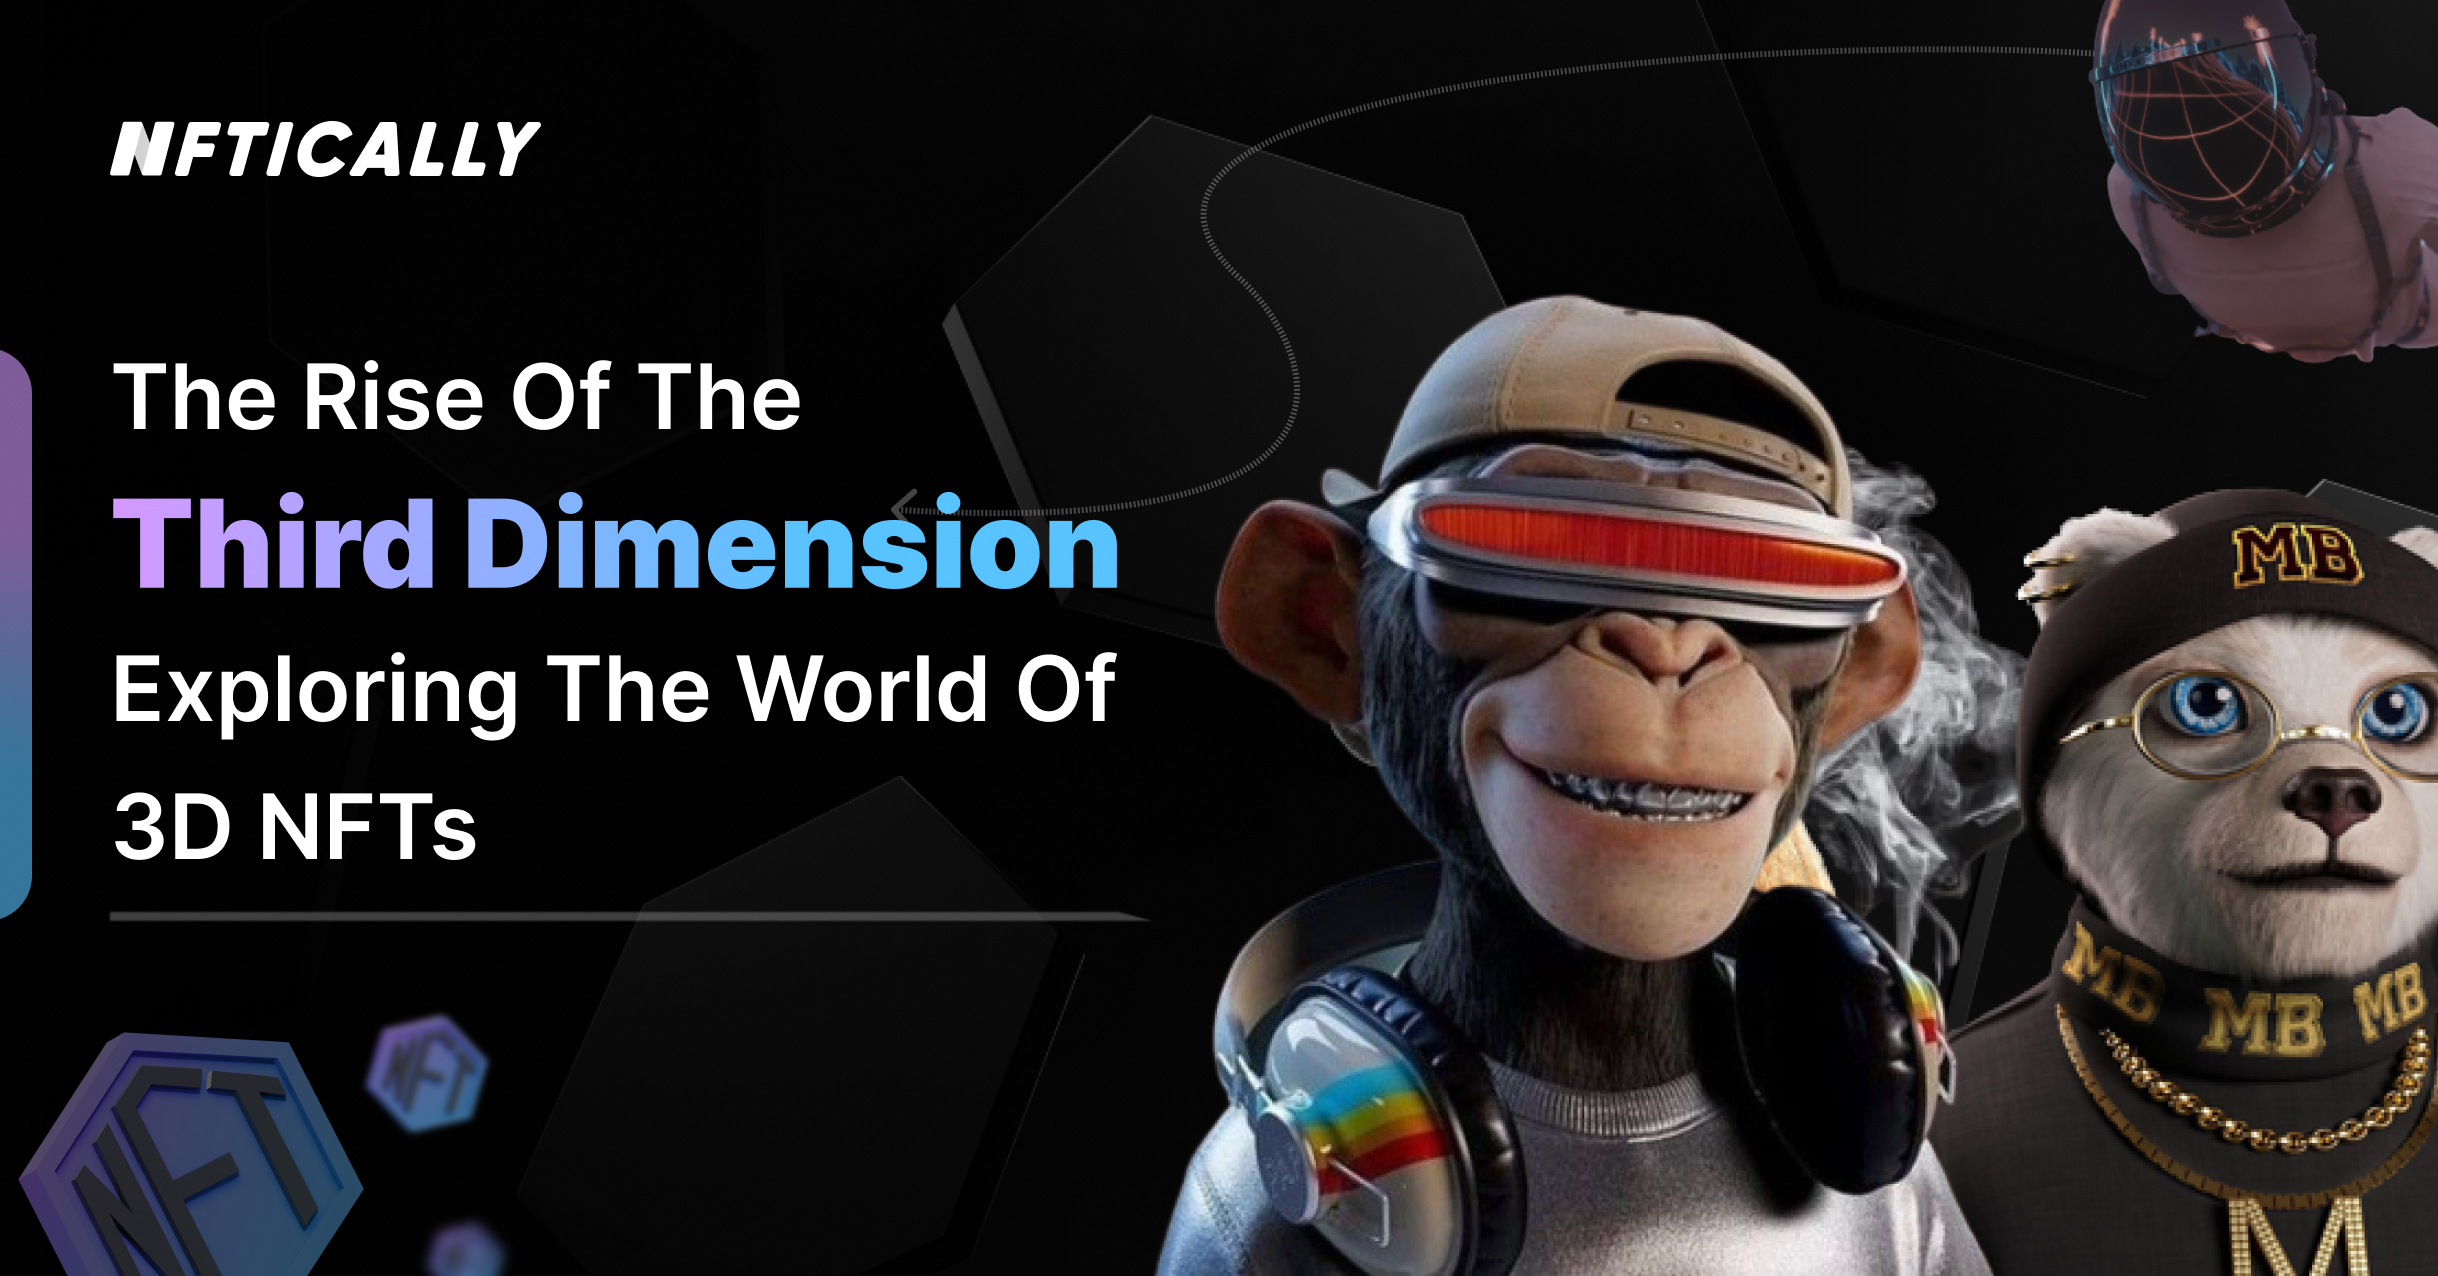 The Rise of the Third Dimension: Exploring the World of 3D NFTs